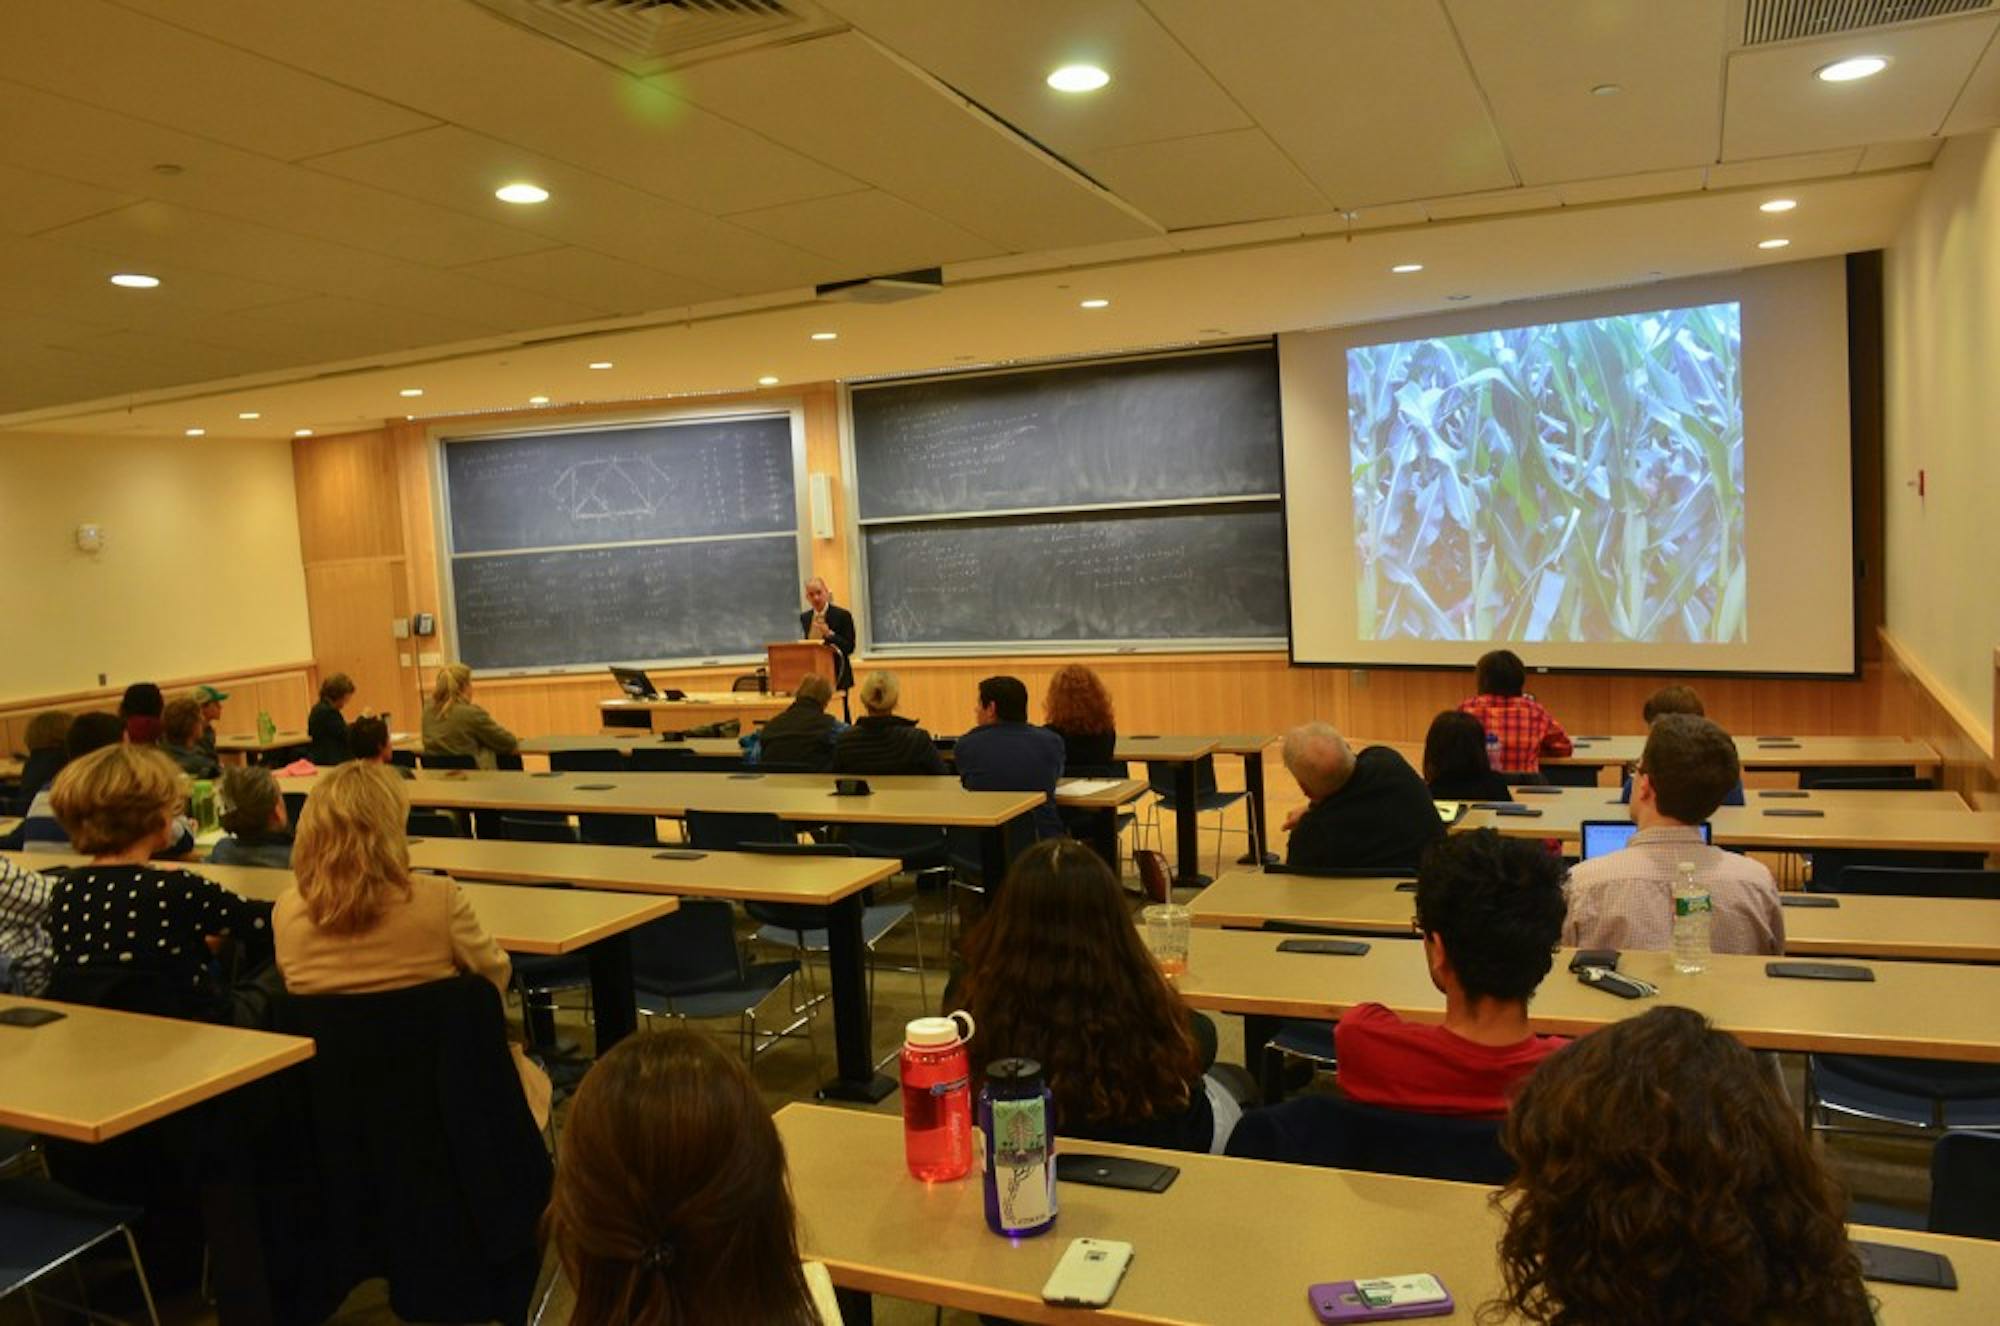 Director of the food and environment program at the Union of Concerned Scientists Ricardo Salvador talked about responsible agricultural production.